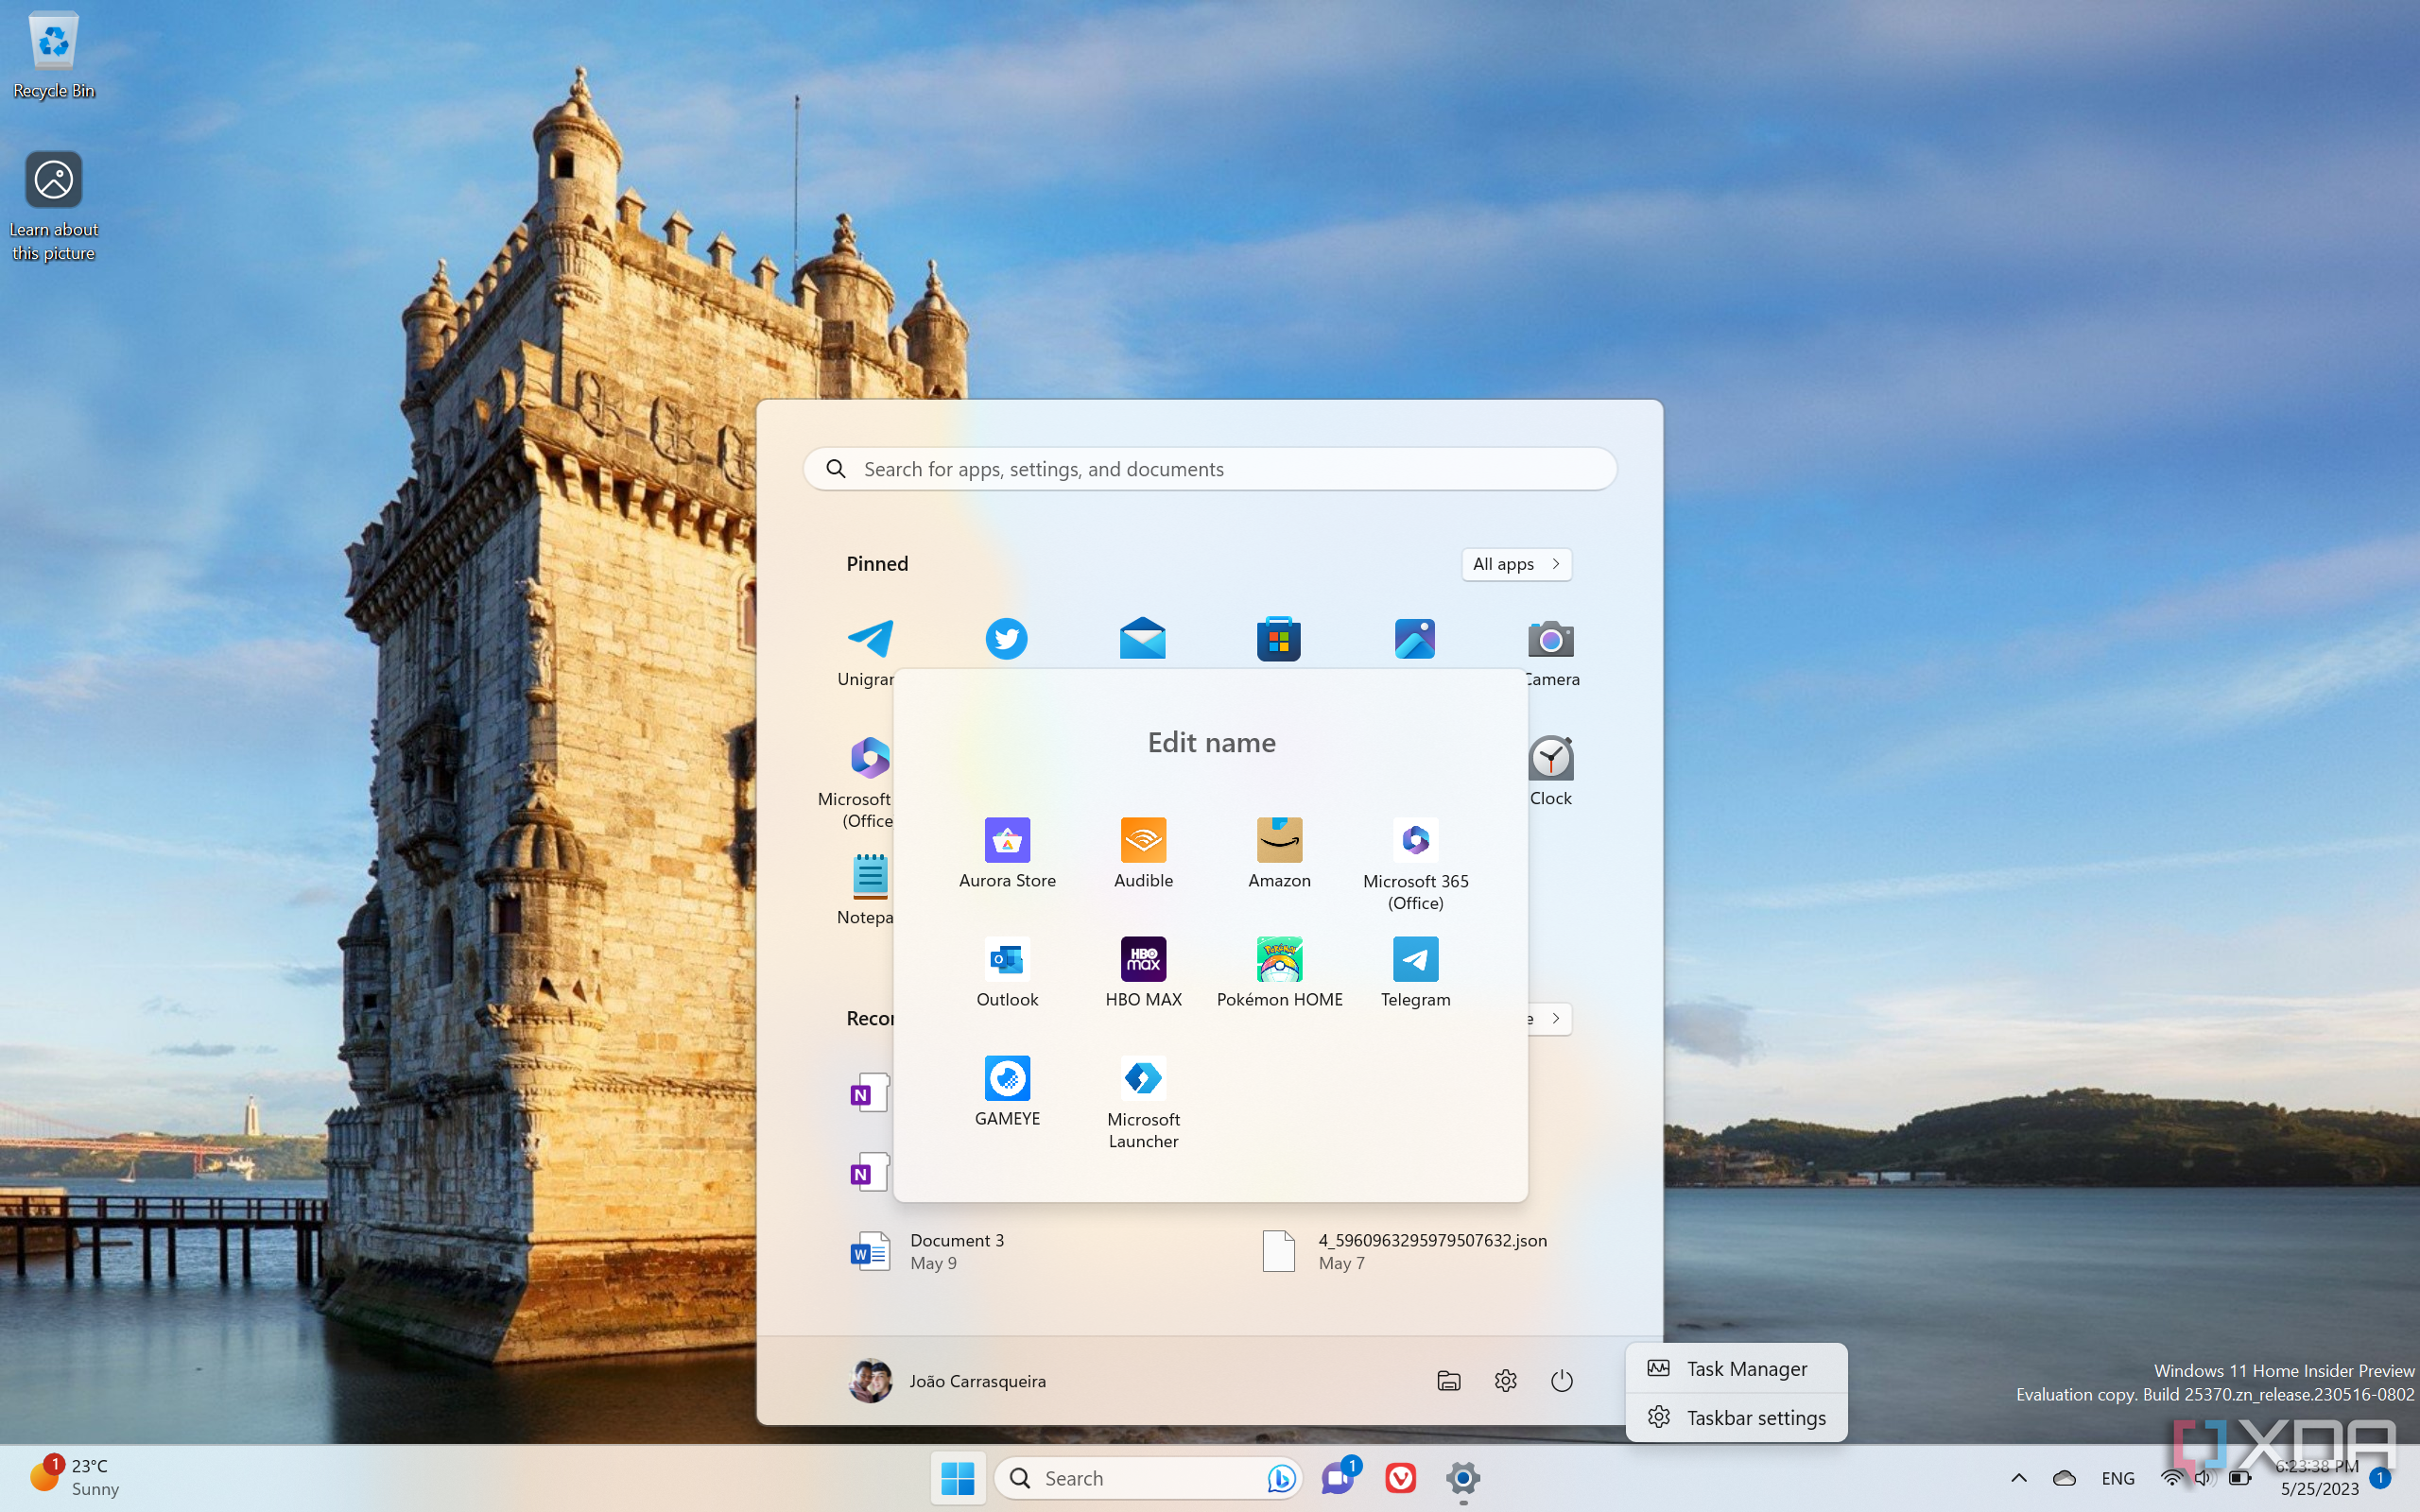 Screenshot of a Windows 11 desktop showcasing features that were brought back form previous releases, including Start menu folders, seconds on the taskbar clock, and a Task Manager button on the taskbar